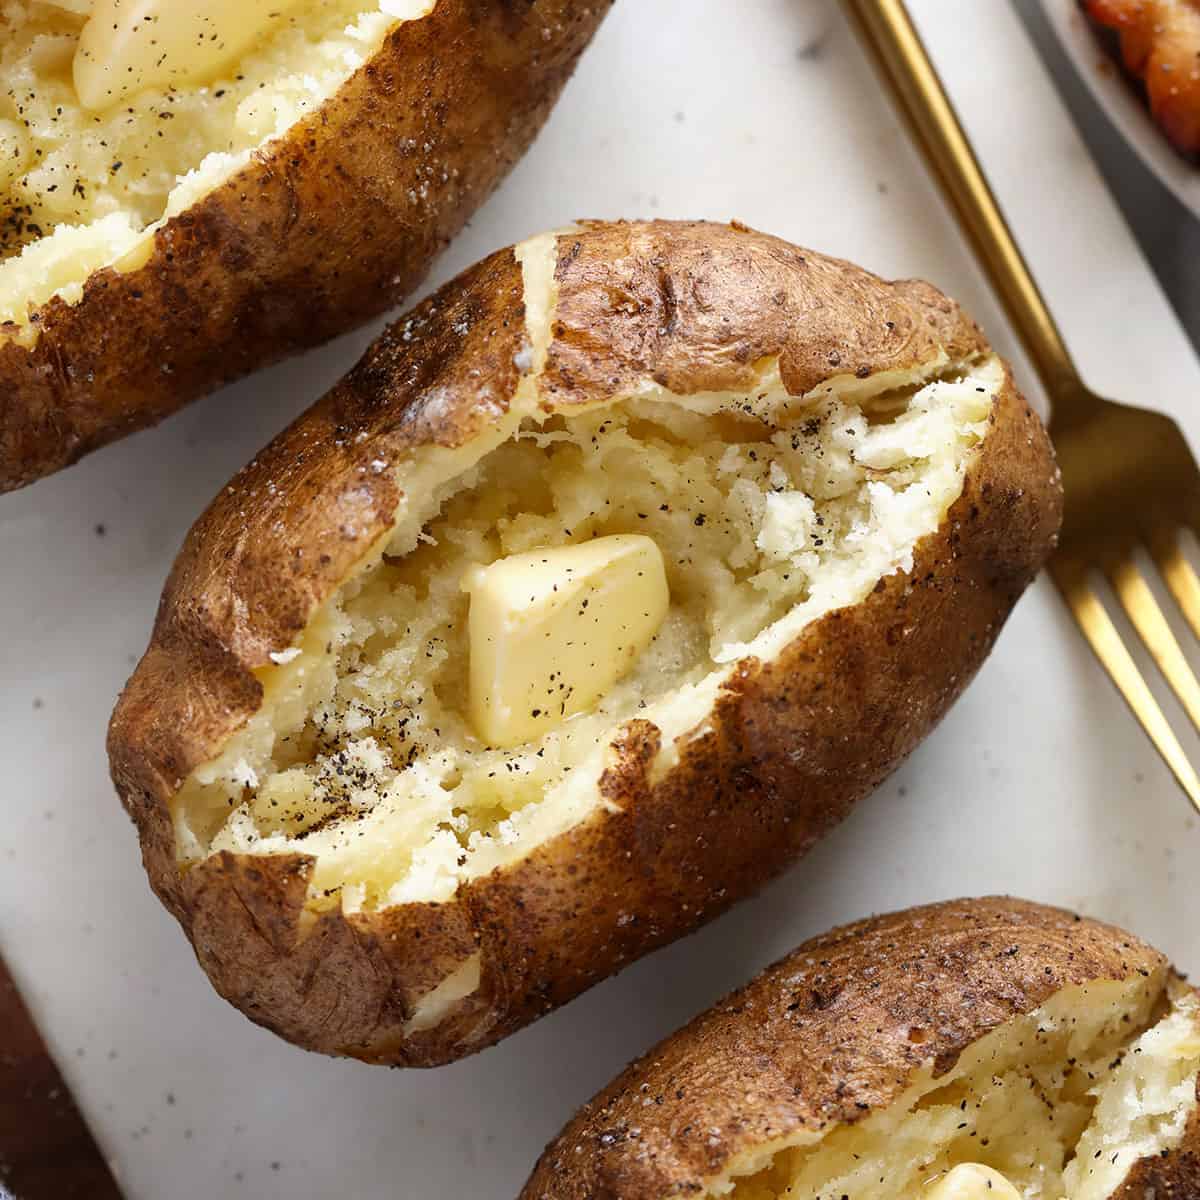 Smoked Baked Potatoes Recipe – Match Foodie Finds